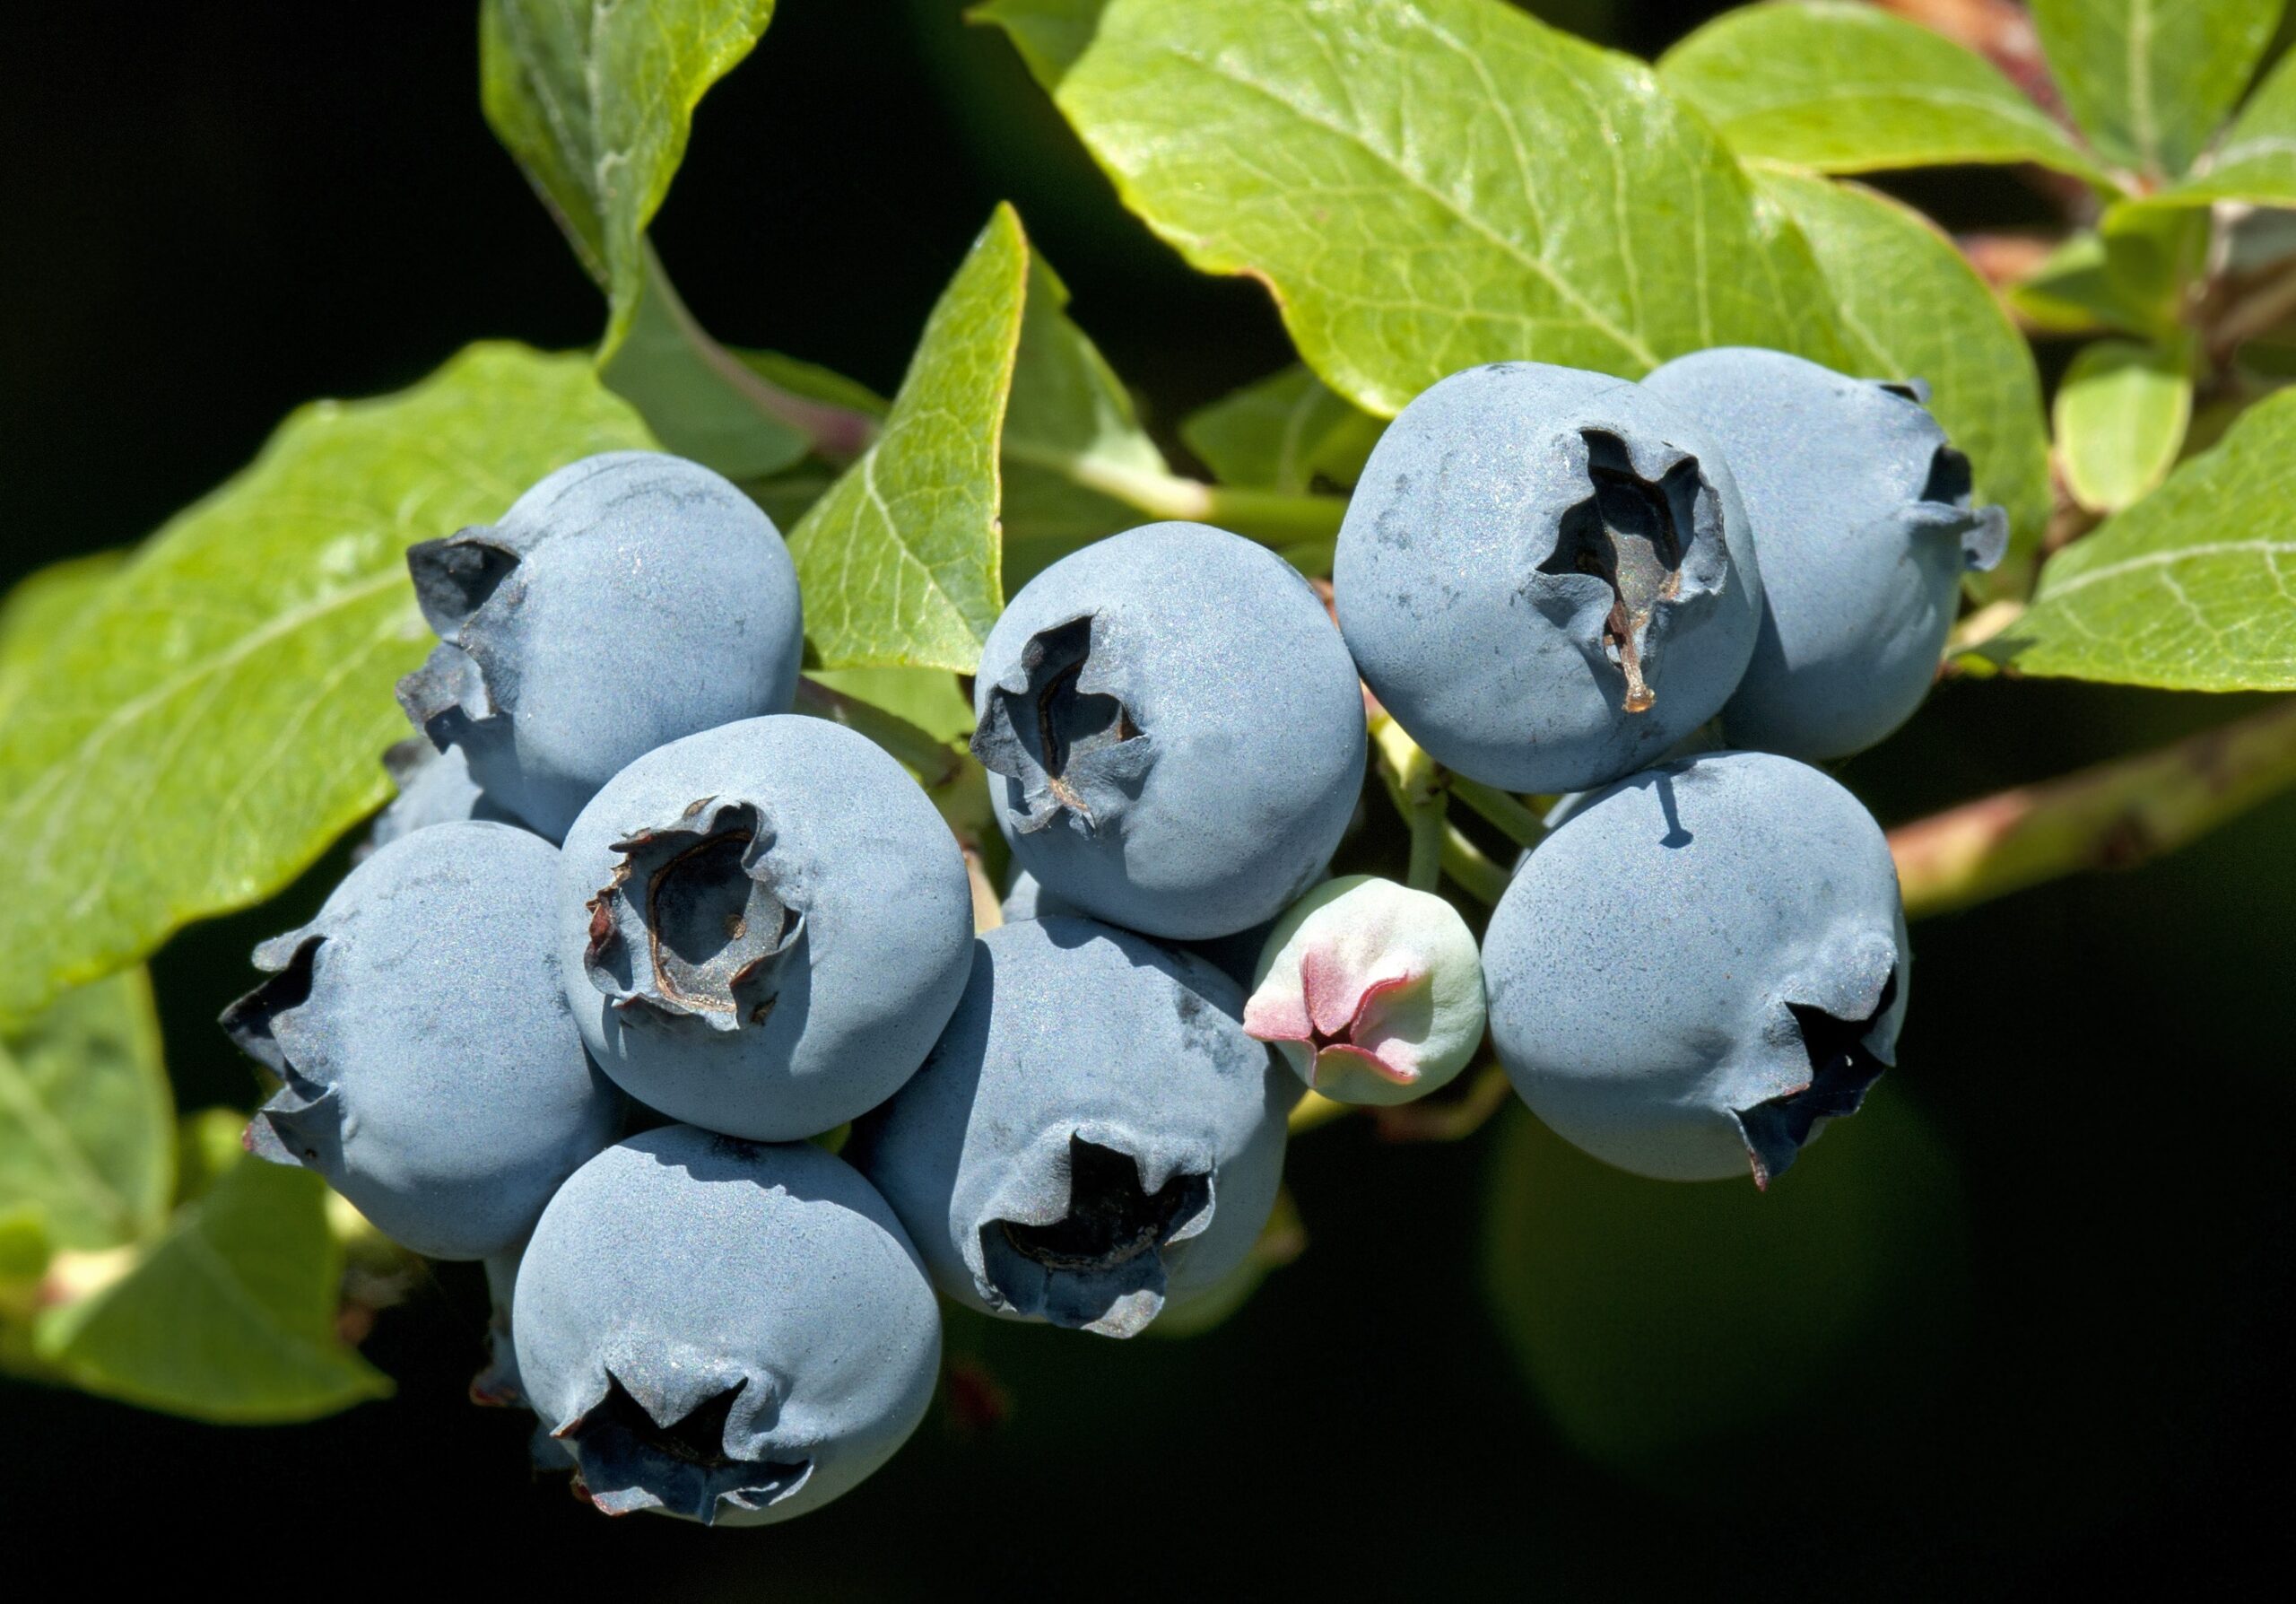 Star High-bush Blueberry. Very large fruit. sweet flavor and firm. Ripens early season. Zones 6-9.